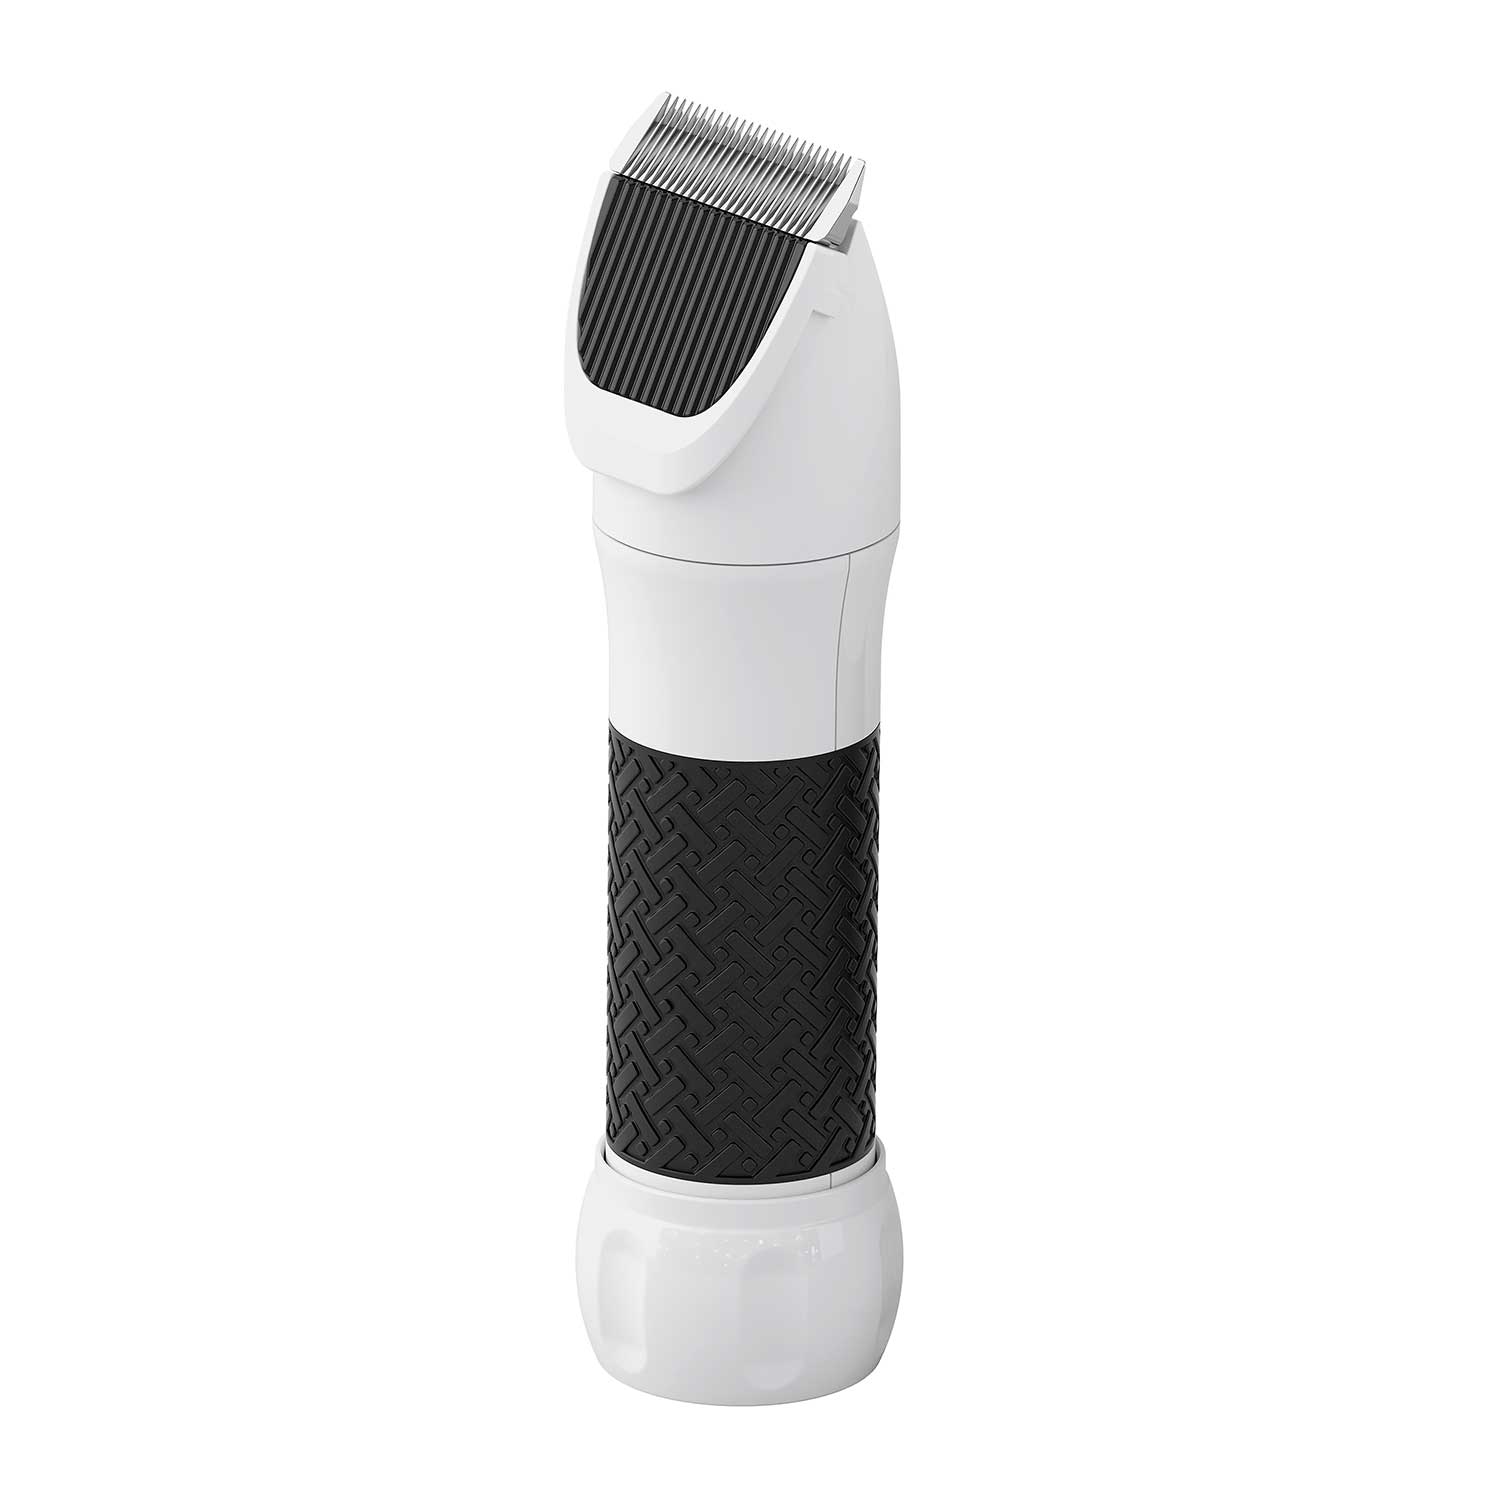 Bell+Howell - Paw Perfect pet hair trimmer. Colour: white